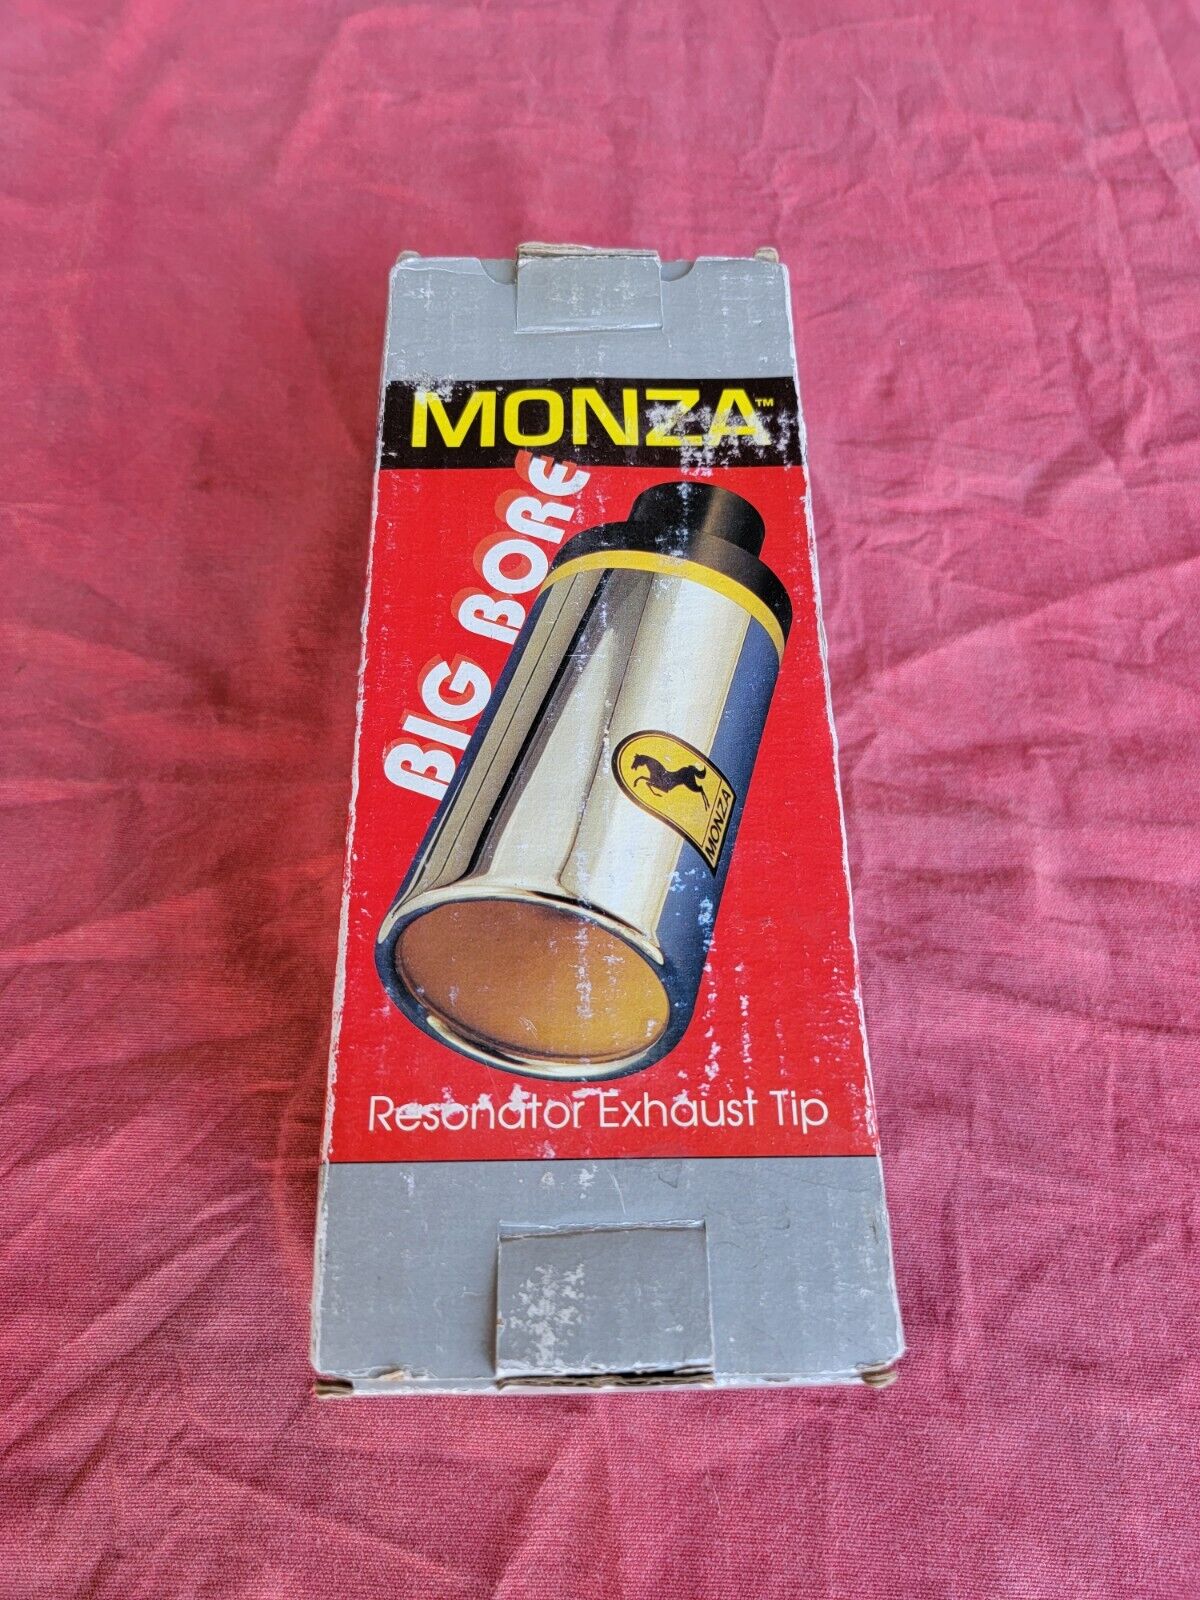 NOS PaceSetter 95-9324 Monza Big Bore Chrome Exhaust Tip Resonator NEW IN BOX